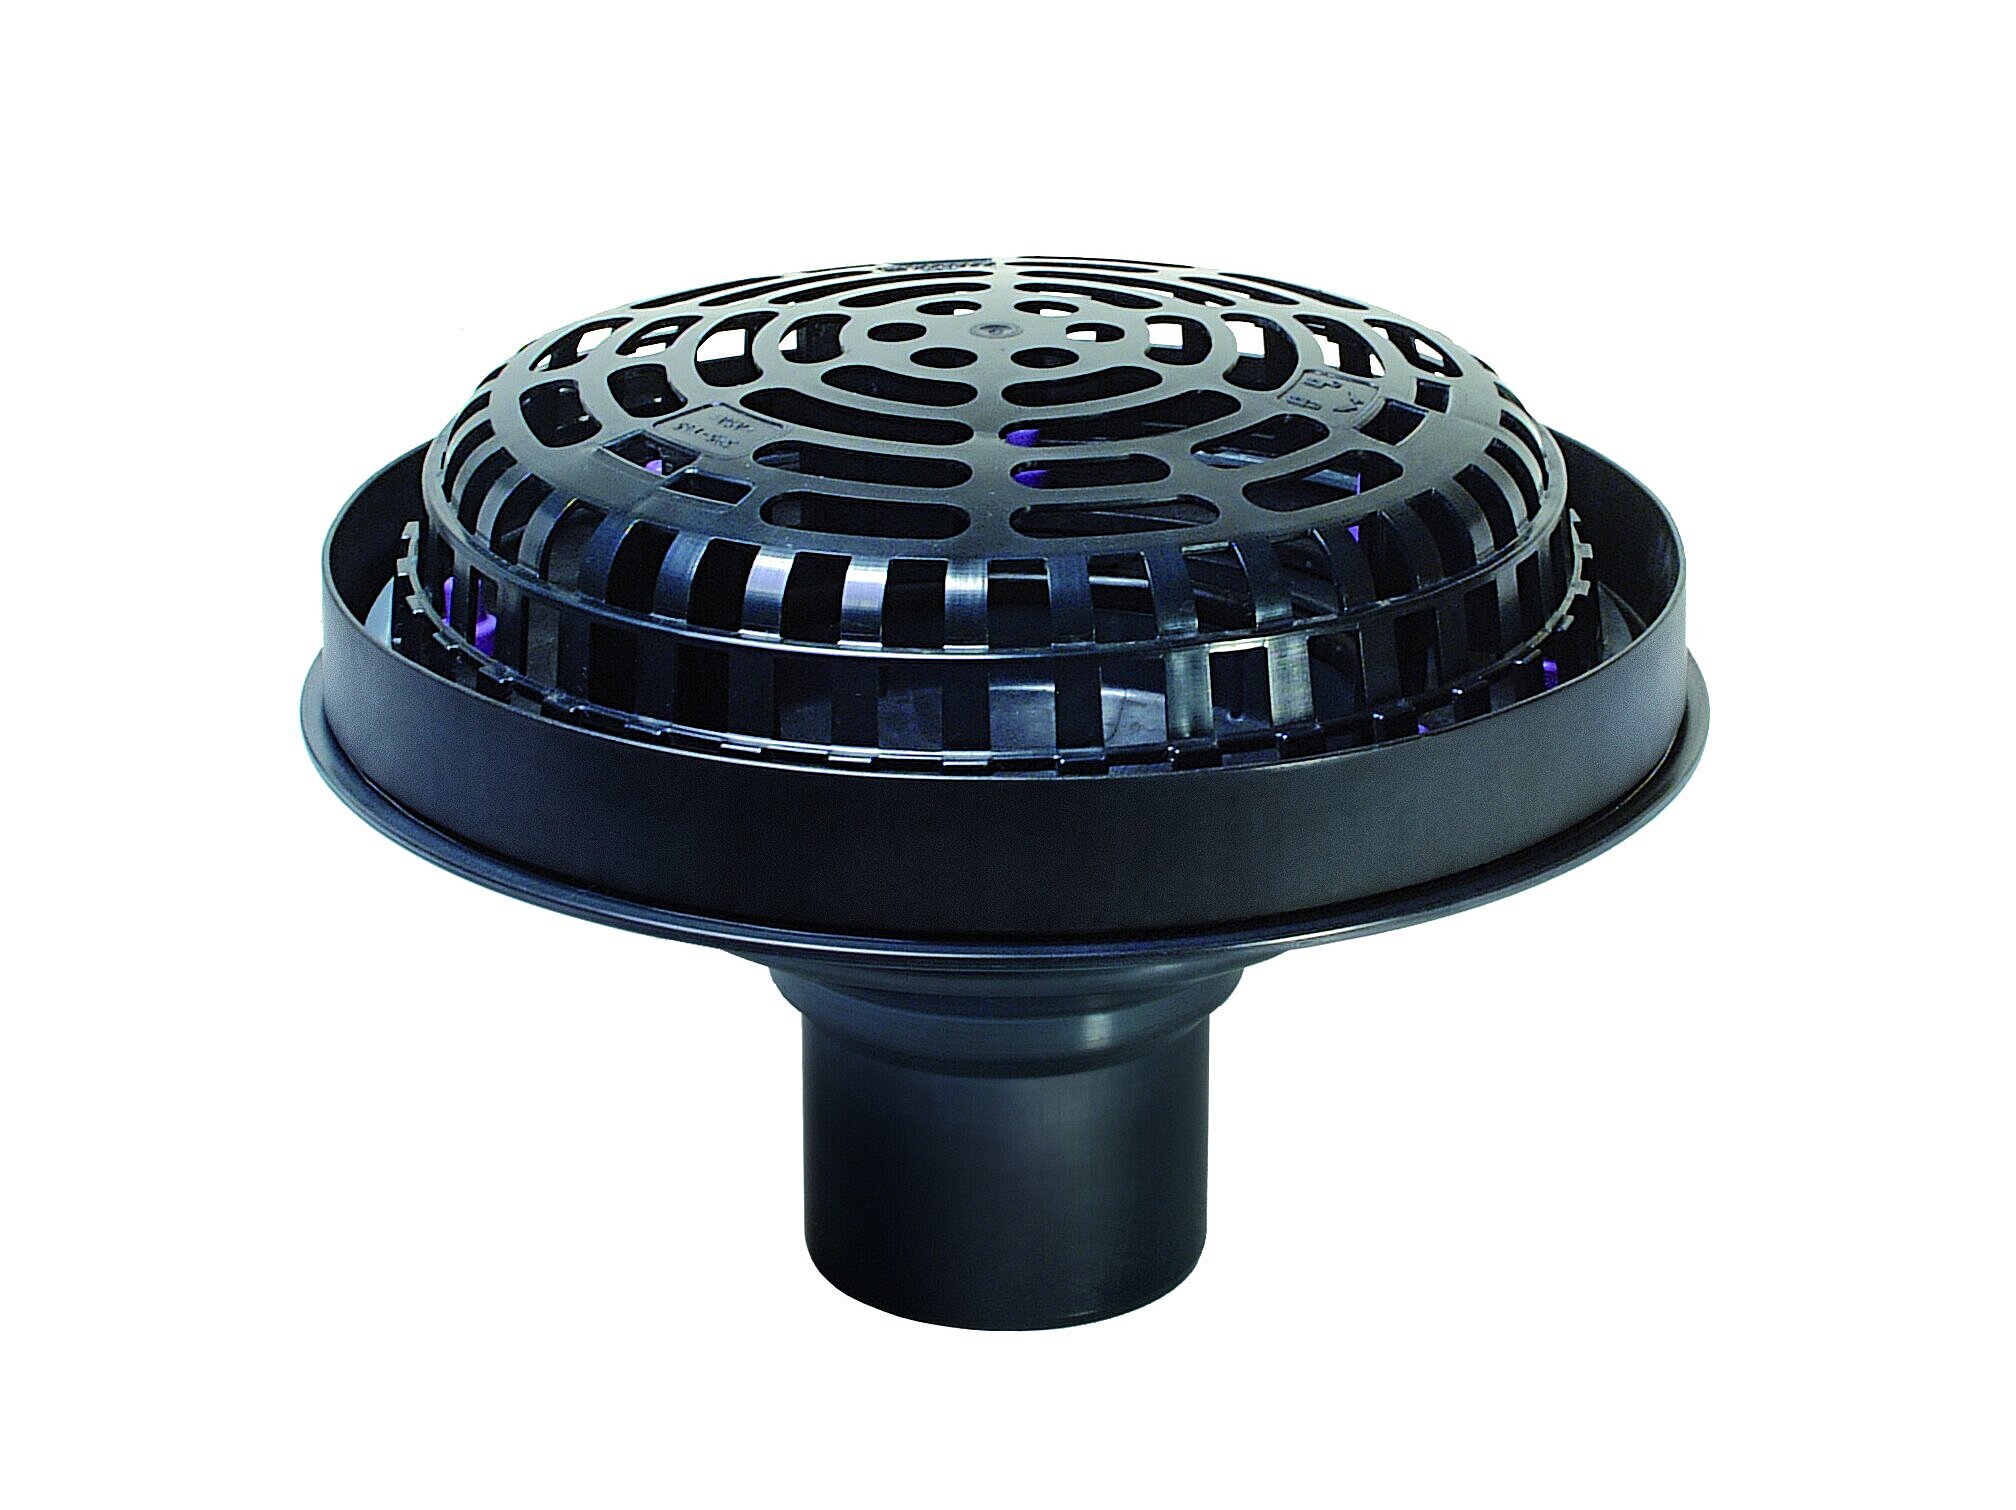 Ecoguss roof drain for flat roof surfaces with a retainer ring